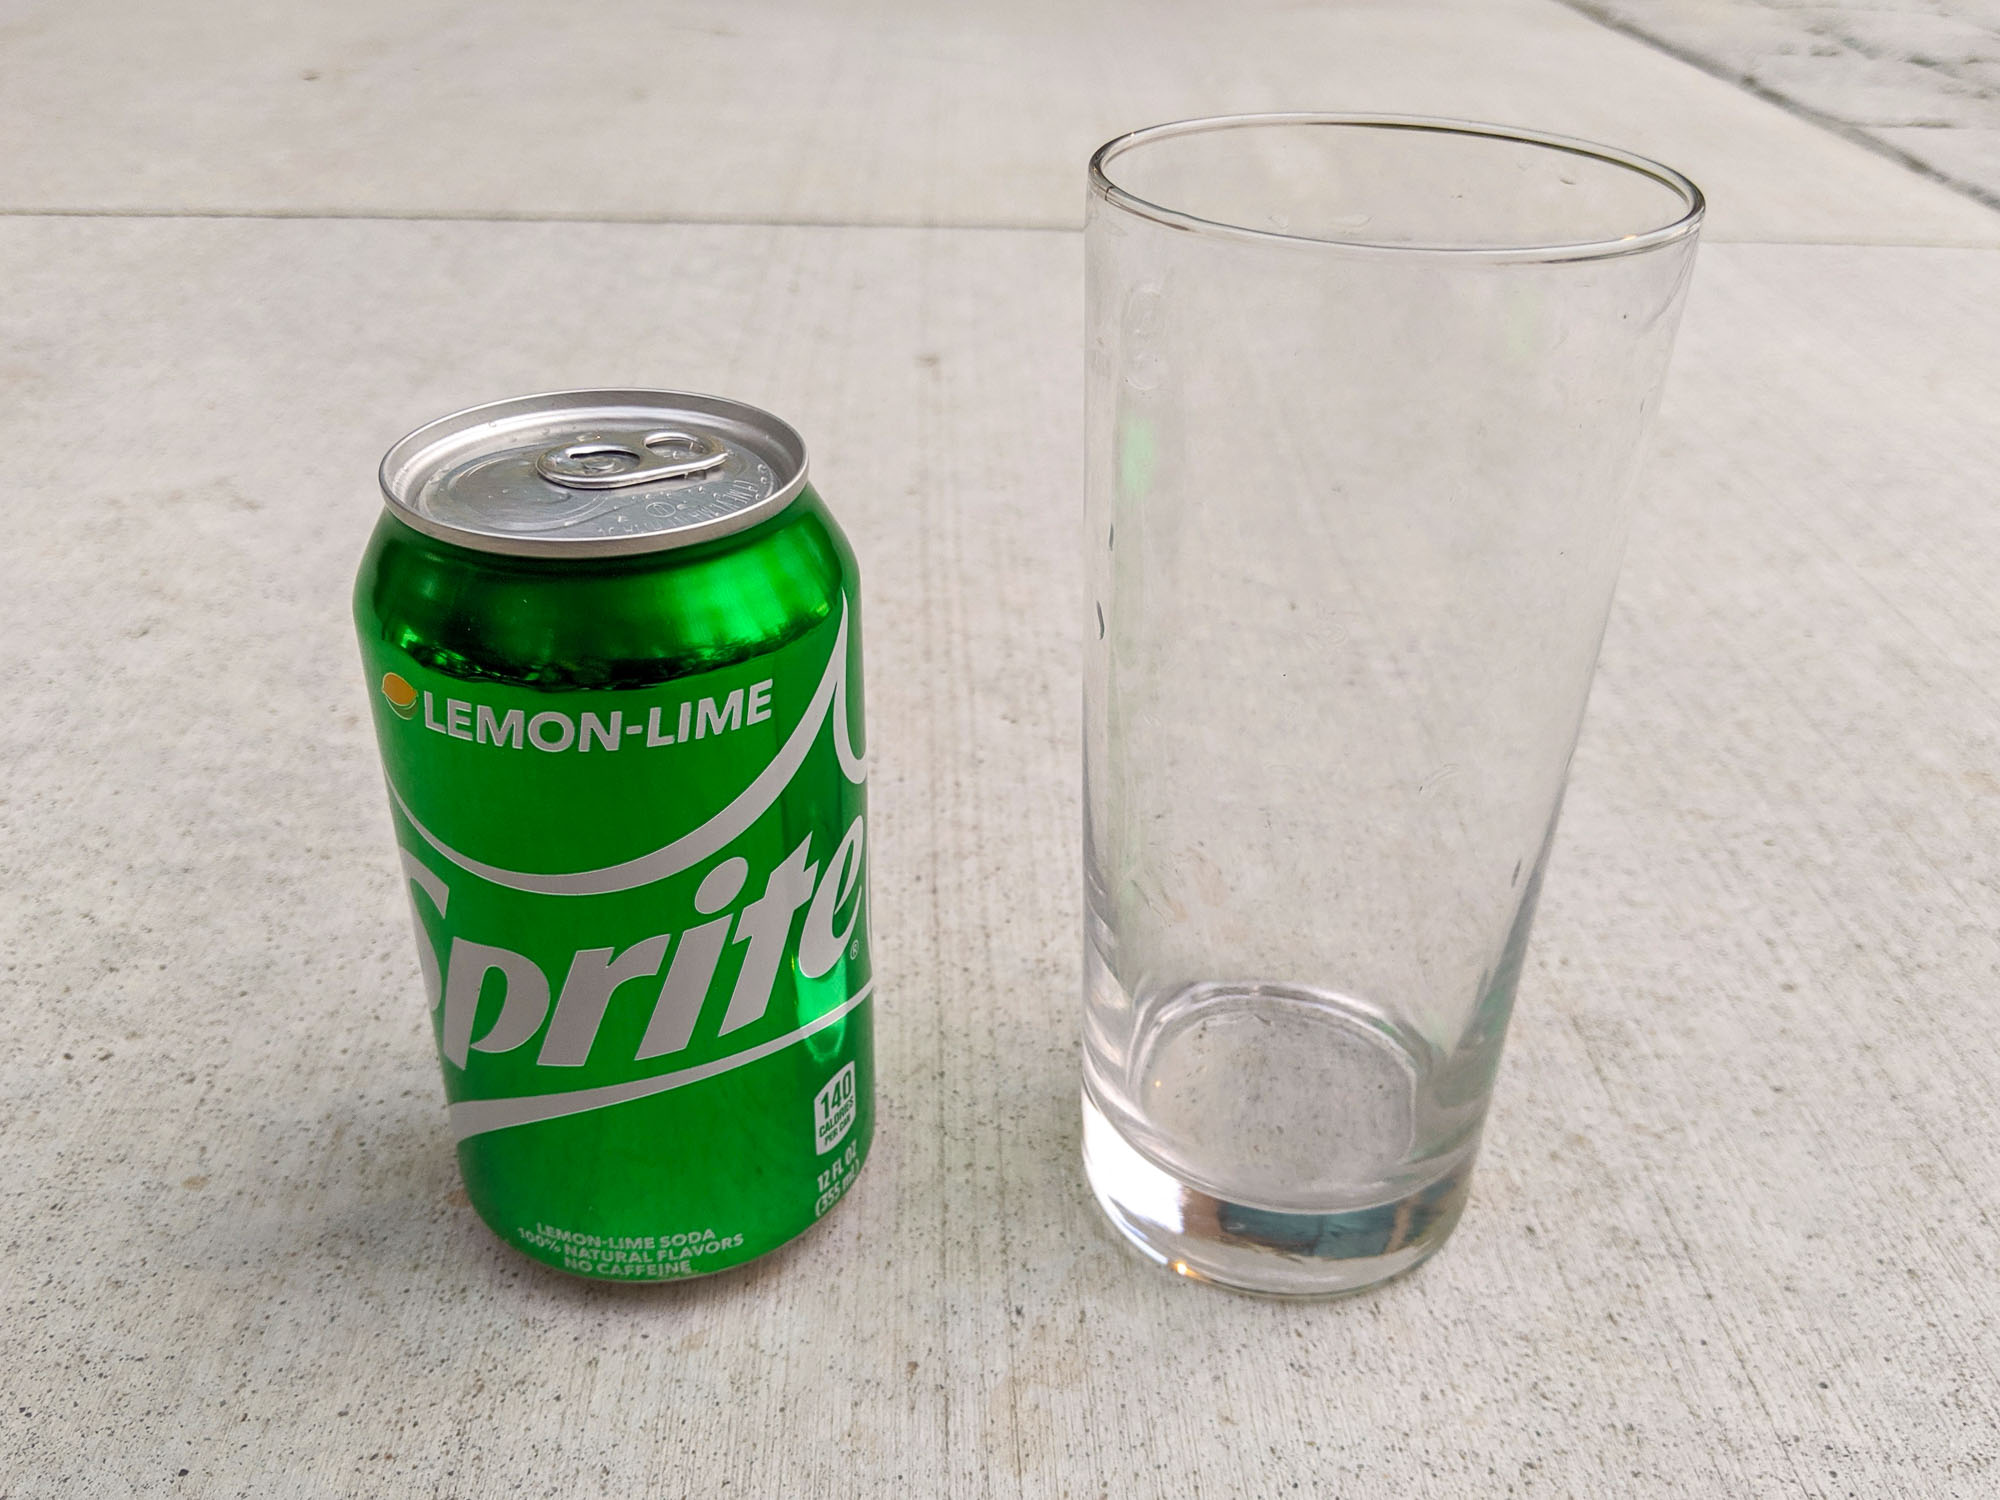 Unopened can of Sprite and glass tumbler